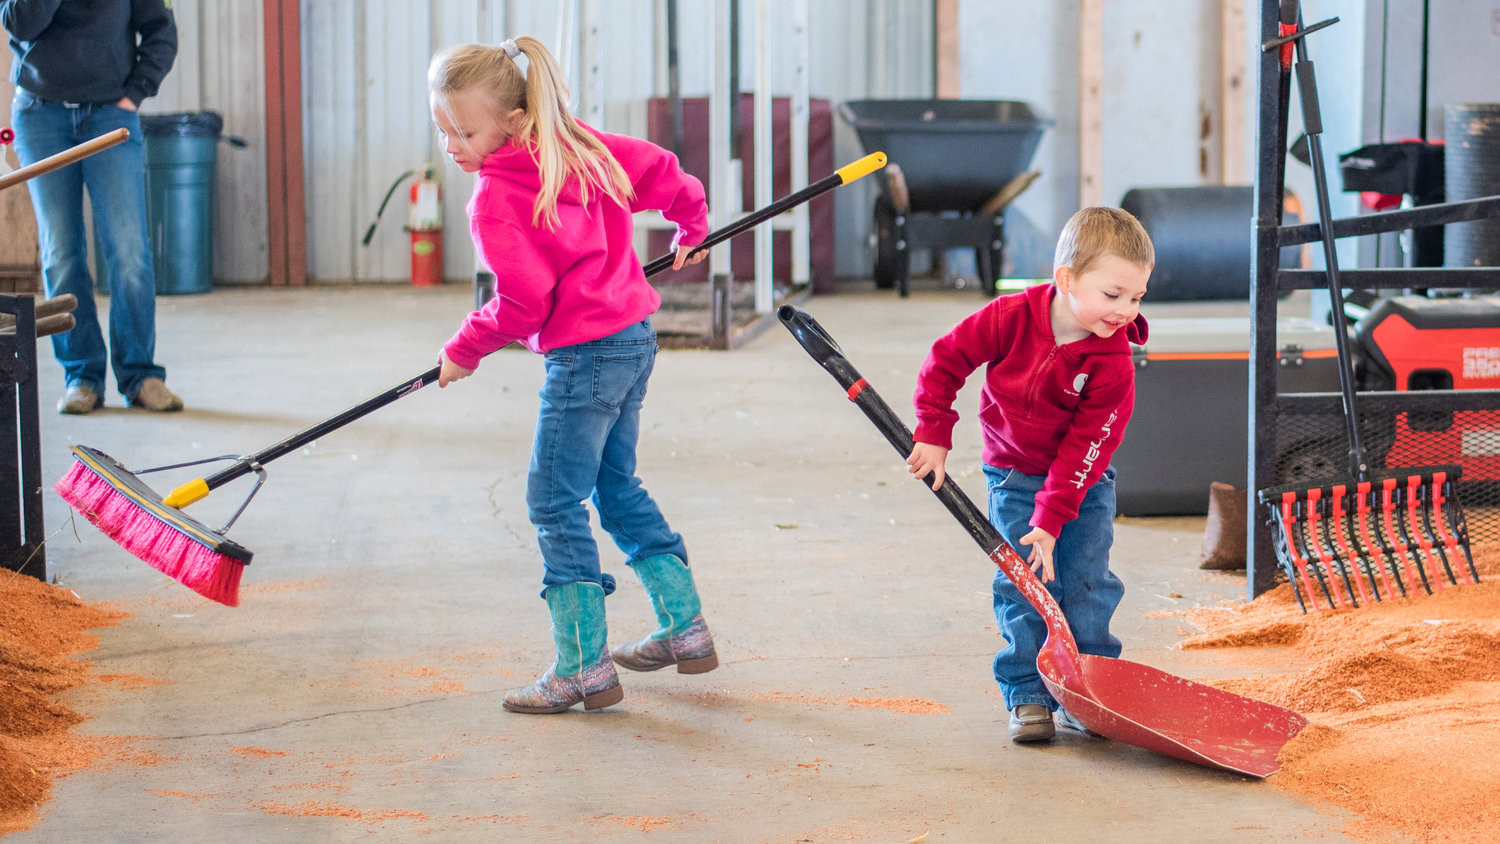 Ella Hylton, 5, and her brother Lane, 3, use a broom and shovel as they prep for the Spring Youth Fair Friday morning at the Southwest Washington Fairgrounds in Centralia.